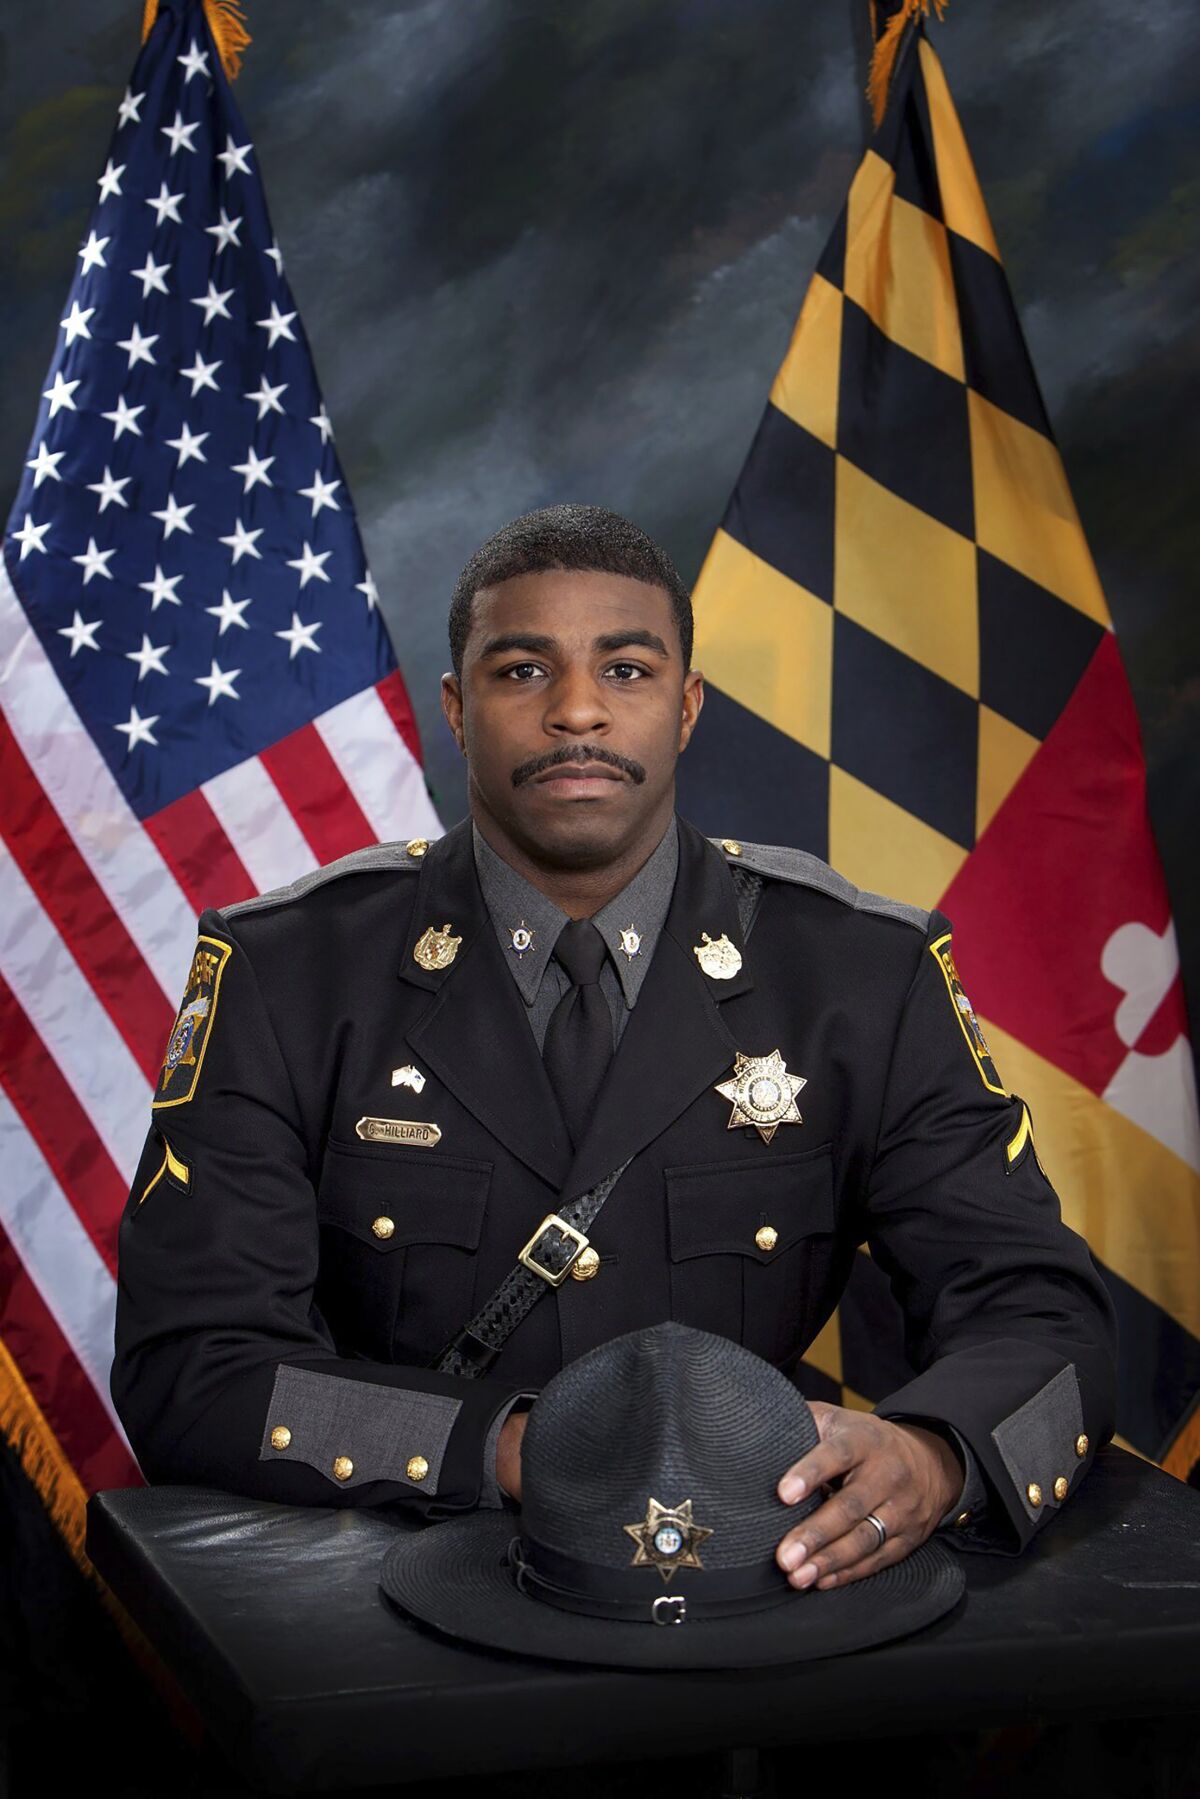 This photo provided by the Wicomico County Sheriff's Office shows Deputy First Class Glenn Hilliard. The Maryland deputy was shot and killed while trying to arrest a fugitive, authorities said. Hilliard spotted the suspect, who was wanted on multiple felony warrants, coming out of an apartment complex Sunday, June 12, 2022 in Pittsville, Maryland, the sheriff's office said. A foot chase ensued and Hilliard was shot trying to arrest the suspect. (Wicomico County Sheriff's Office via AP)